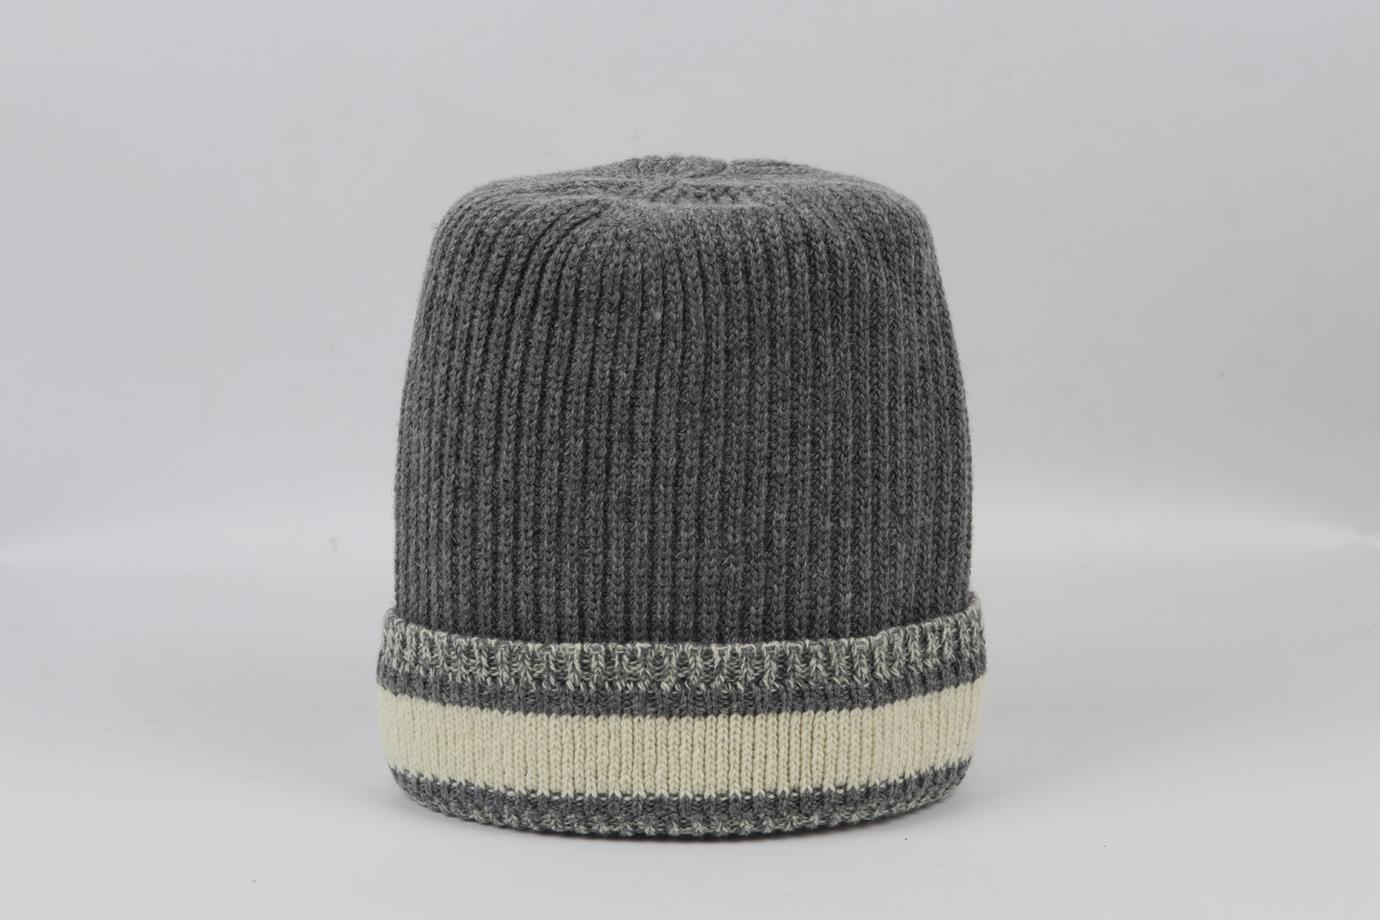 Christian Dior logo intarsia wool and cashmere blend ribbed beanie. Grey and cream. Slips on. 70% Wool, 30% cashmere. Does not come with dustbag or box. Length: 11.25 in. Circumference: 18 in. Very good condition - Worn once. No sign of wear; see